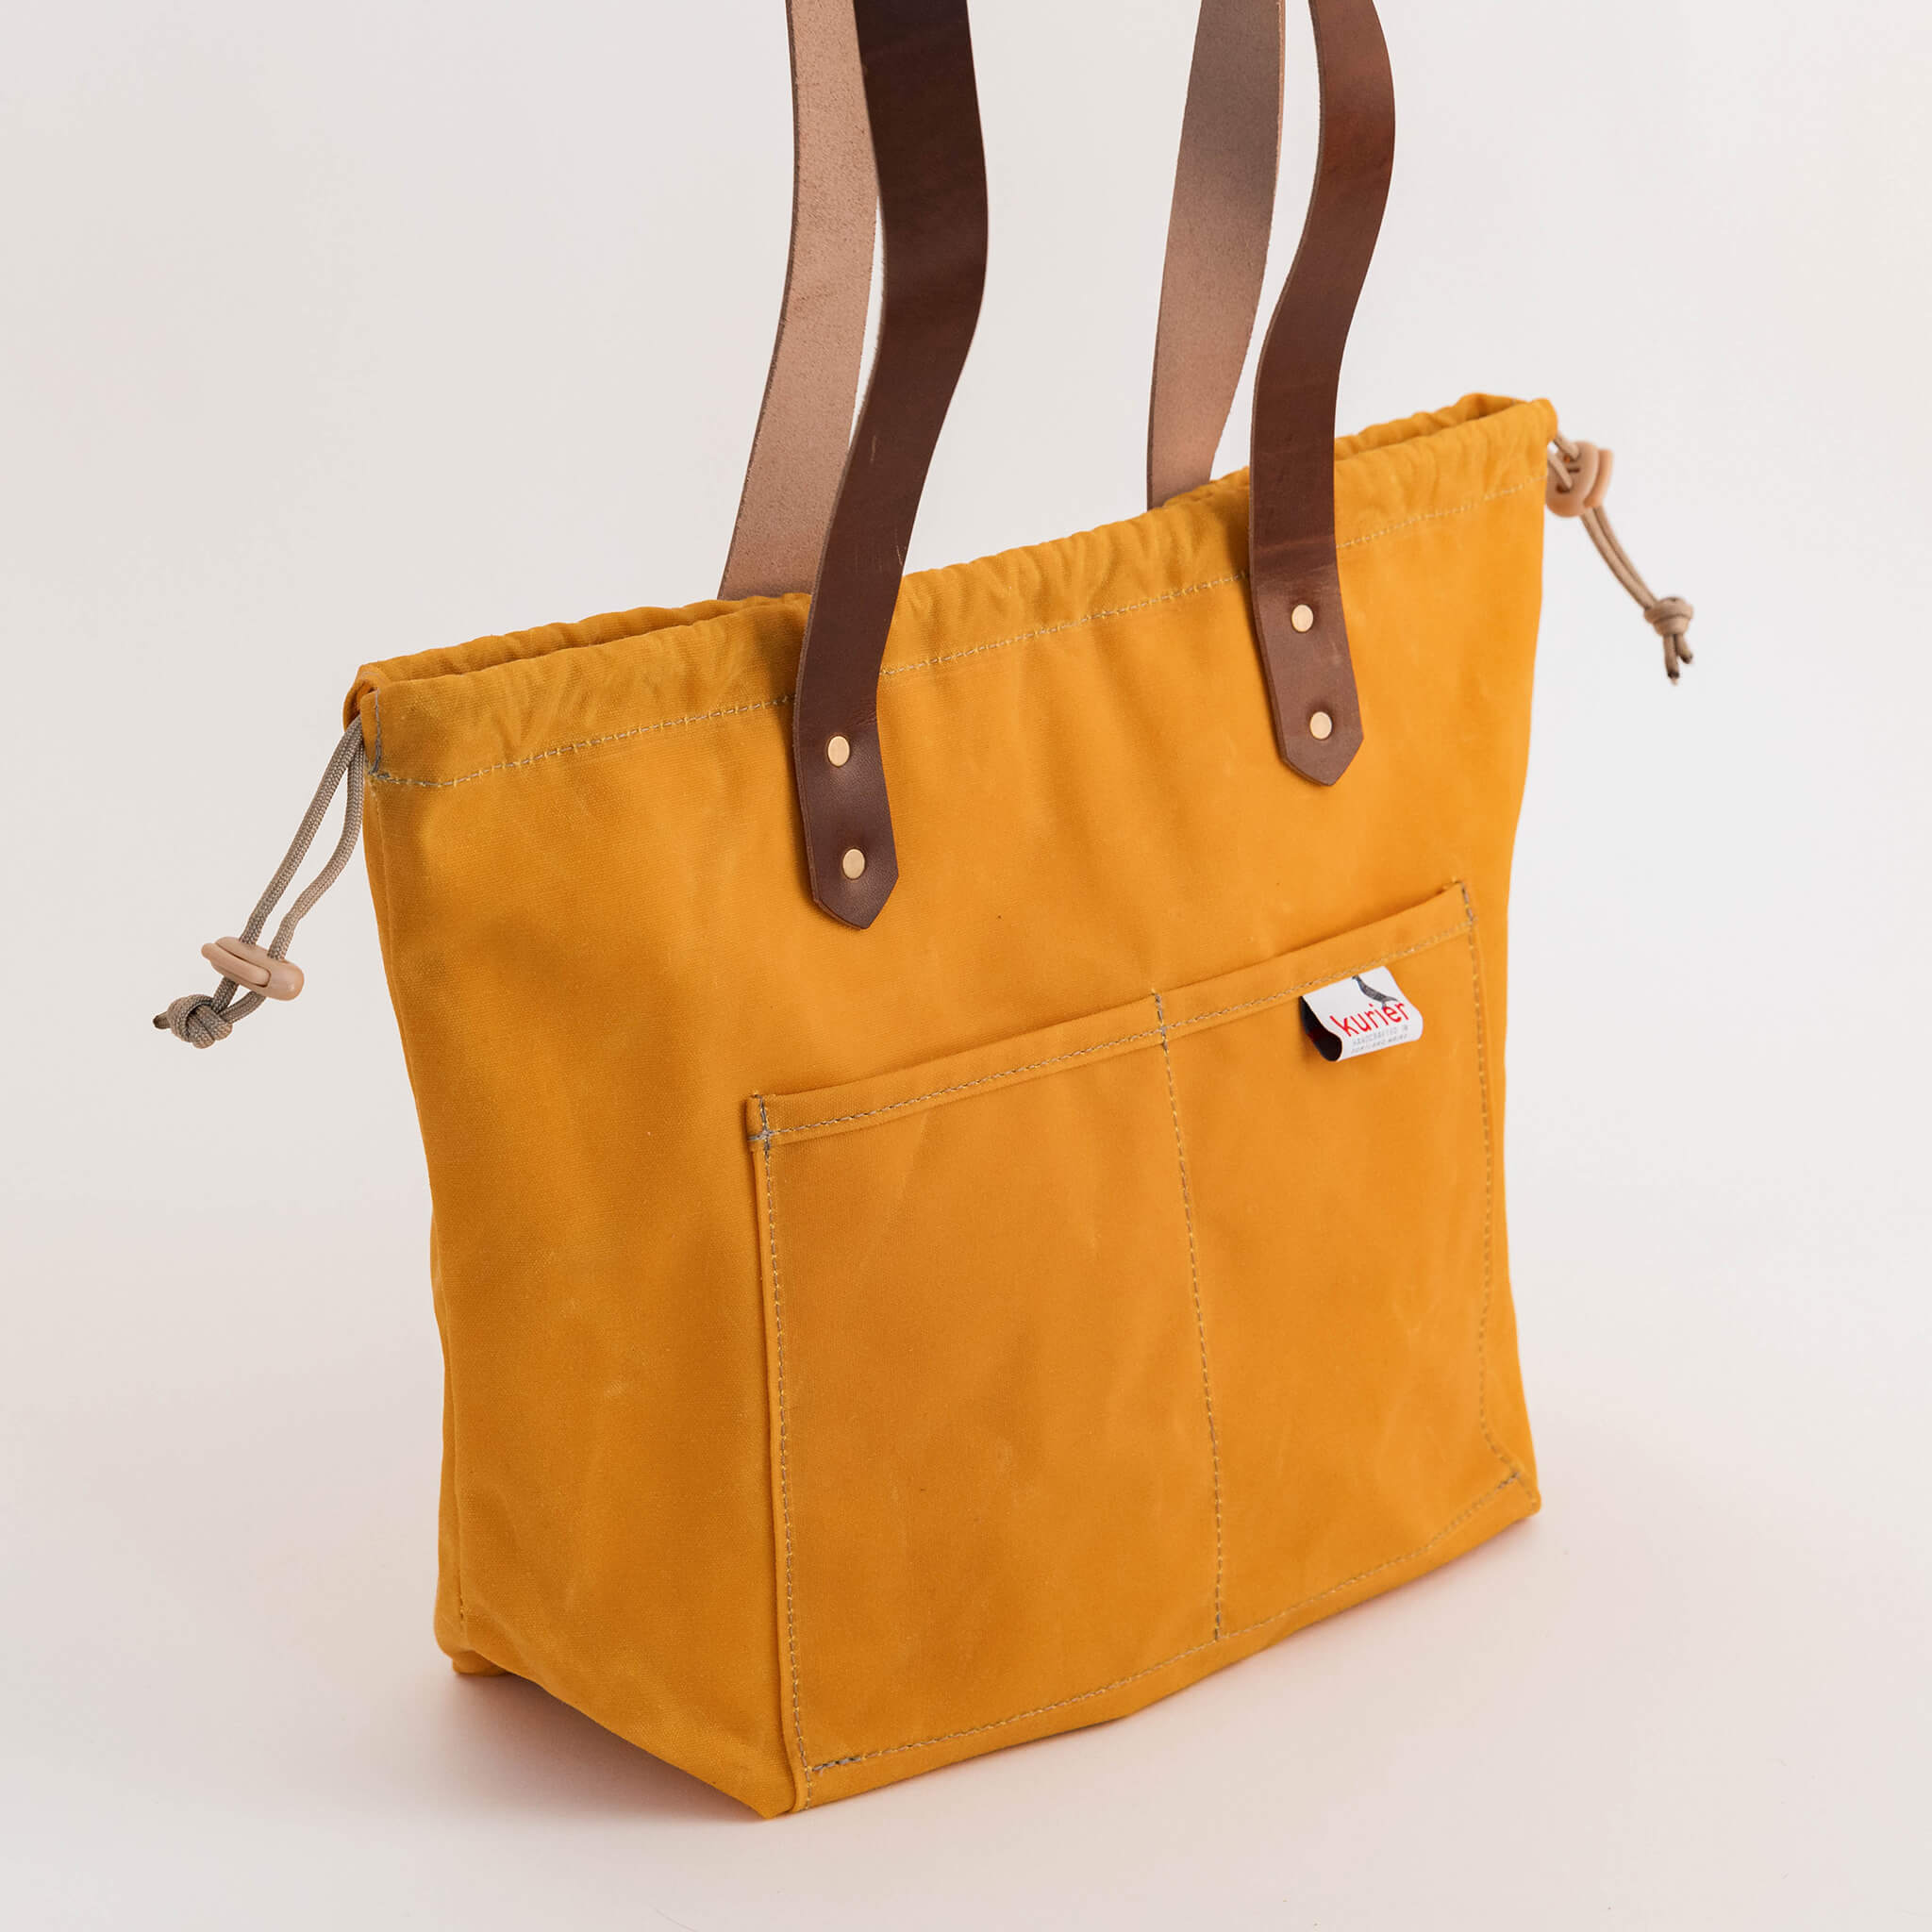 waxed canvas town tote - drawstring travel bag - handmade leather - buttercup side view